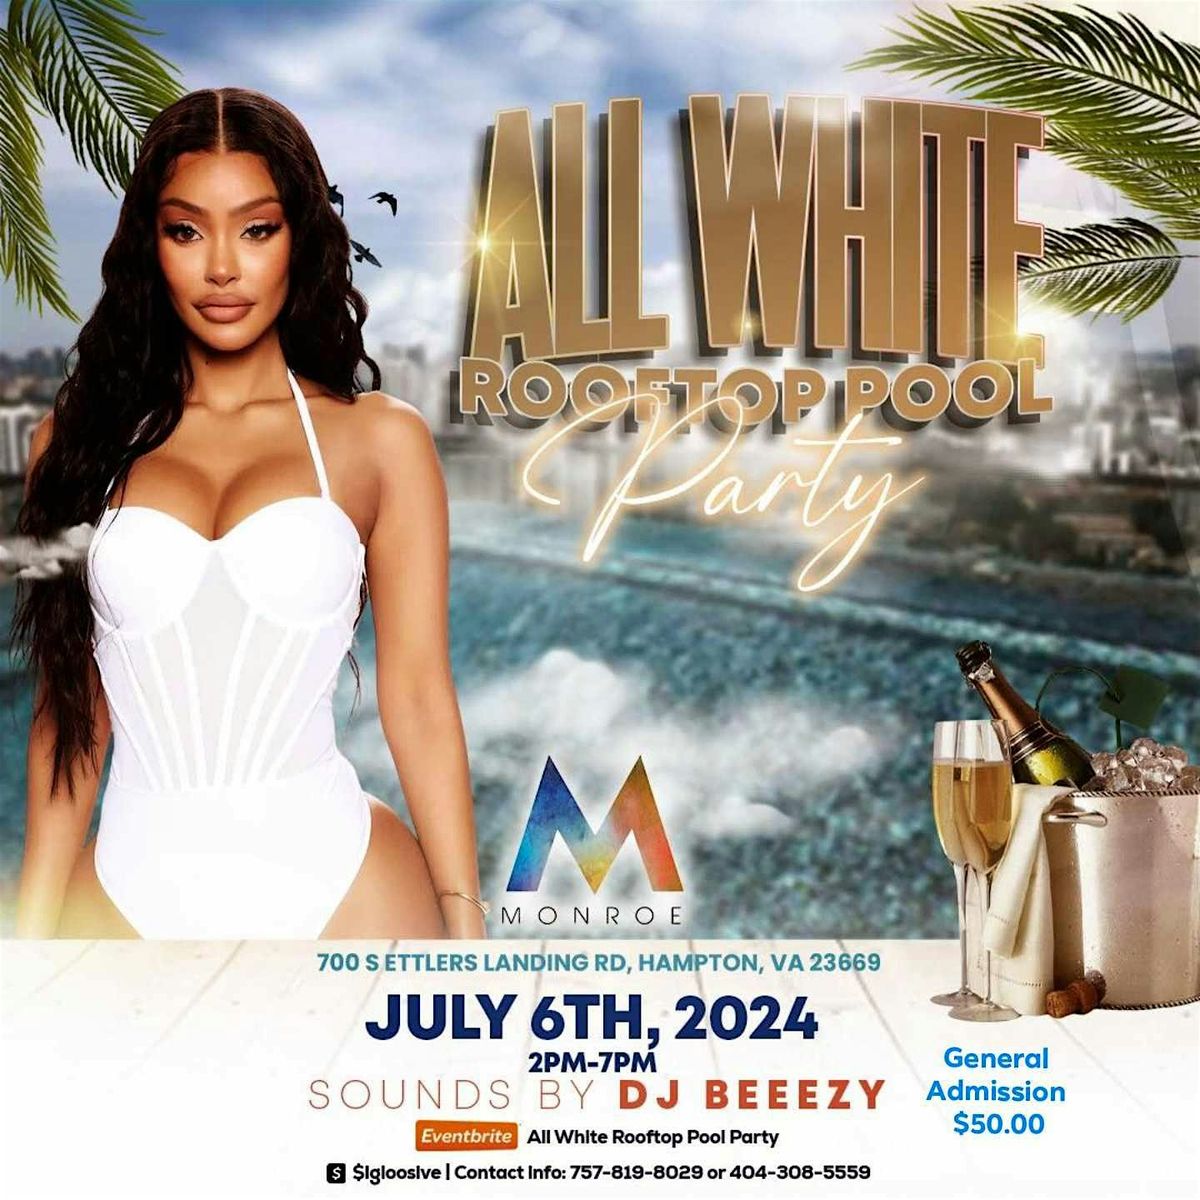 All White Rooftop Pool Party